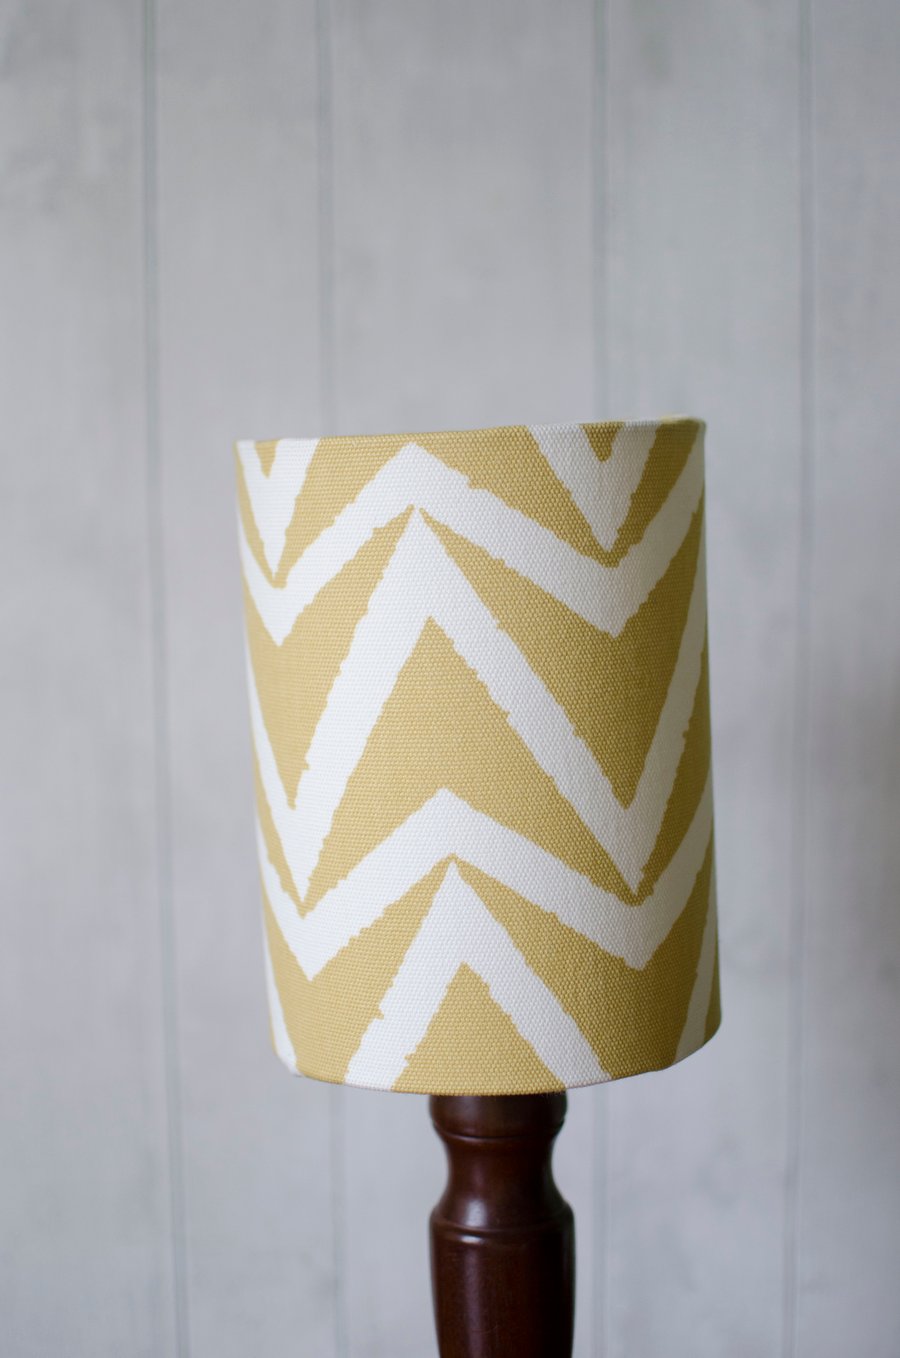 20cm Scion Yellow and White Lamp shade